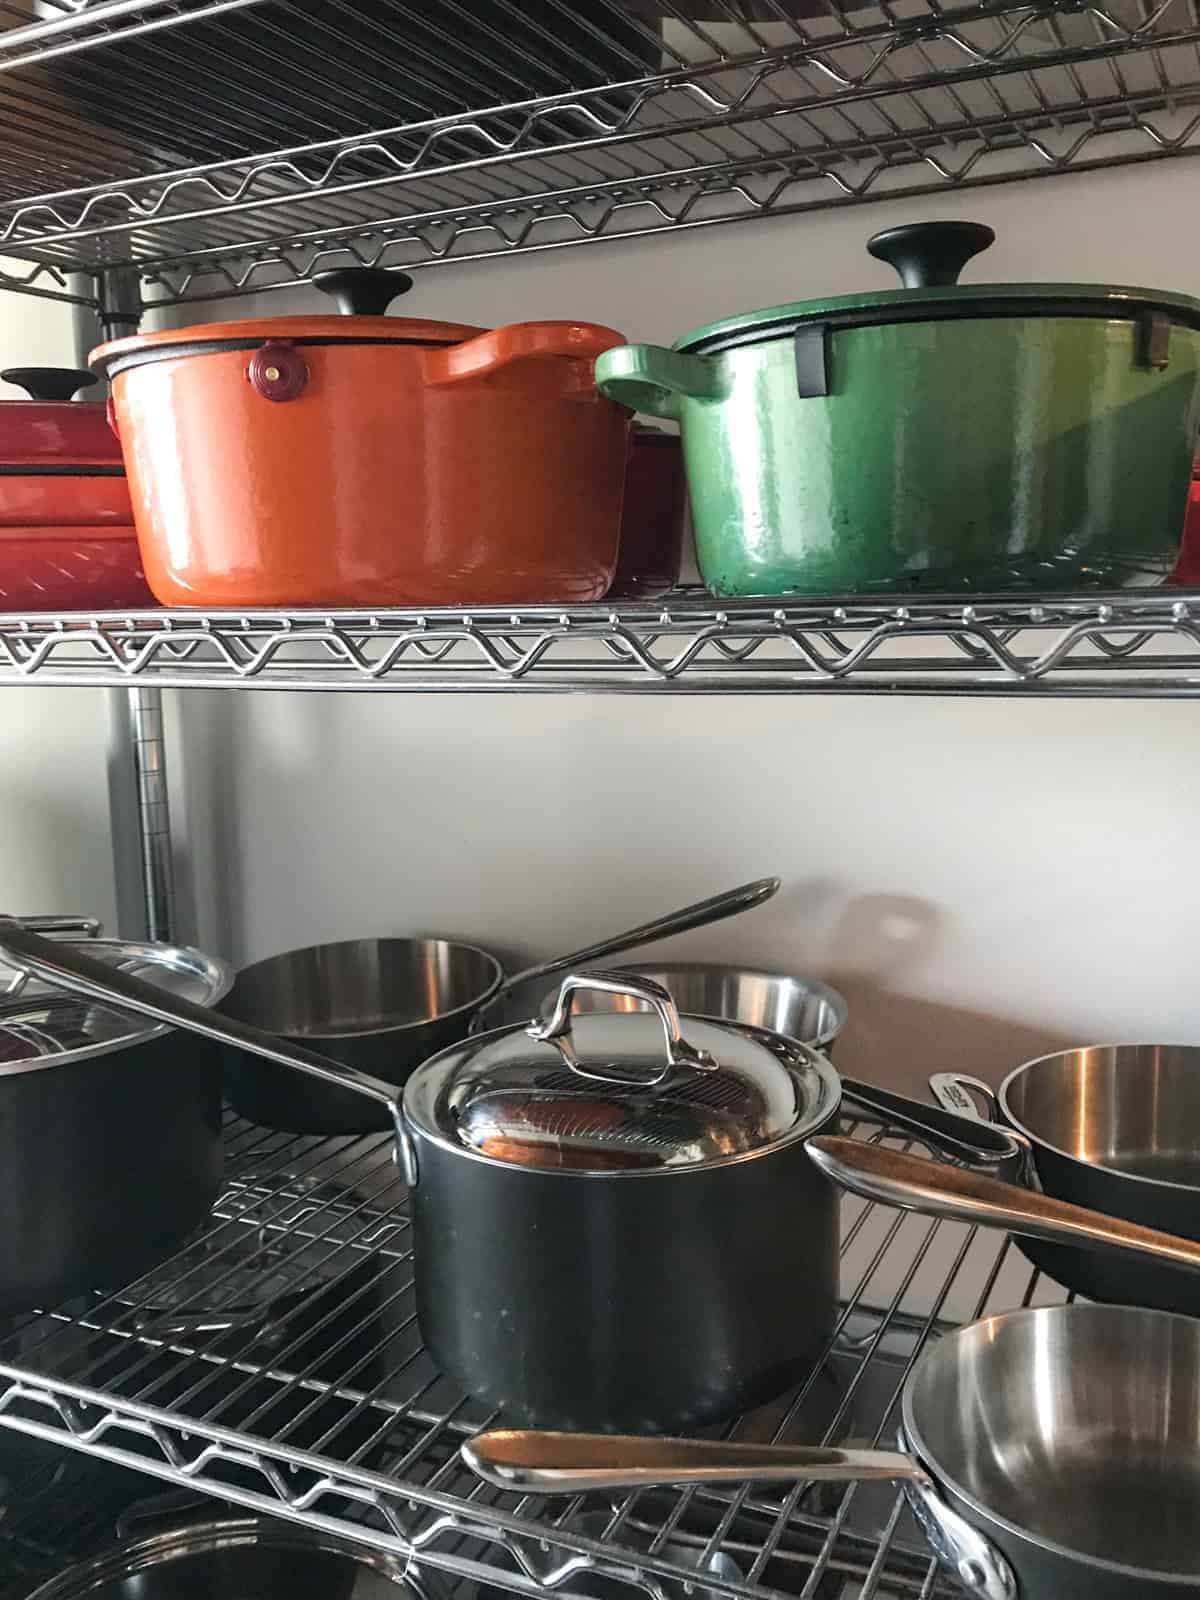 Two shelves full of pots and pans.